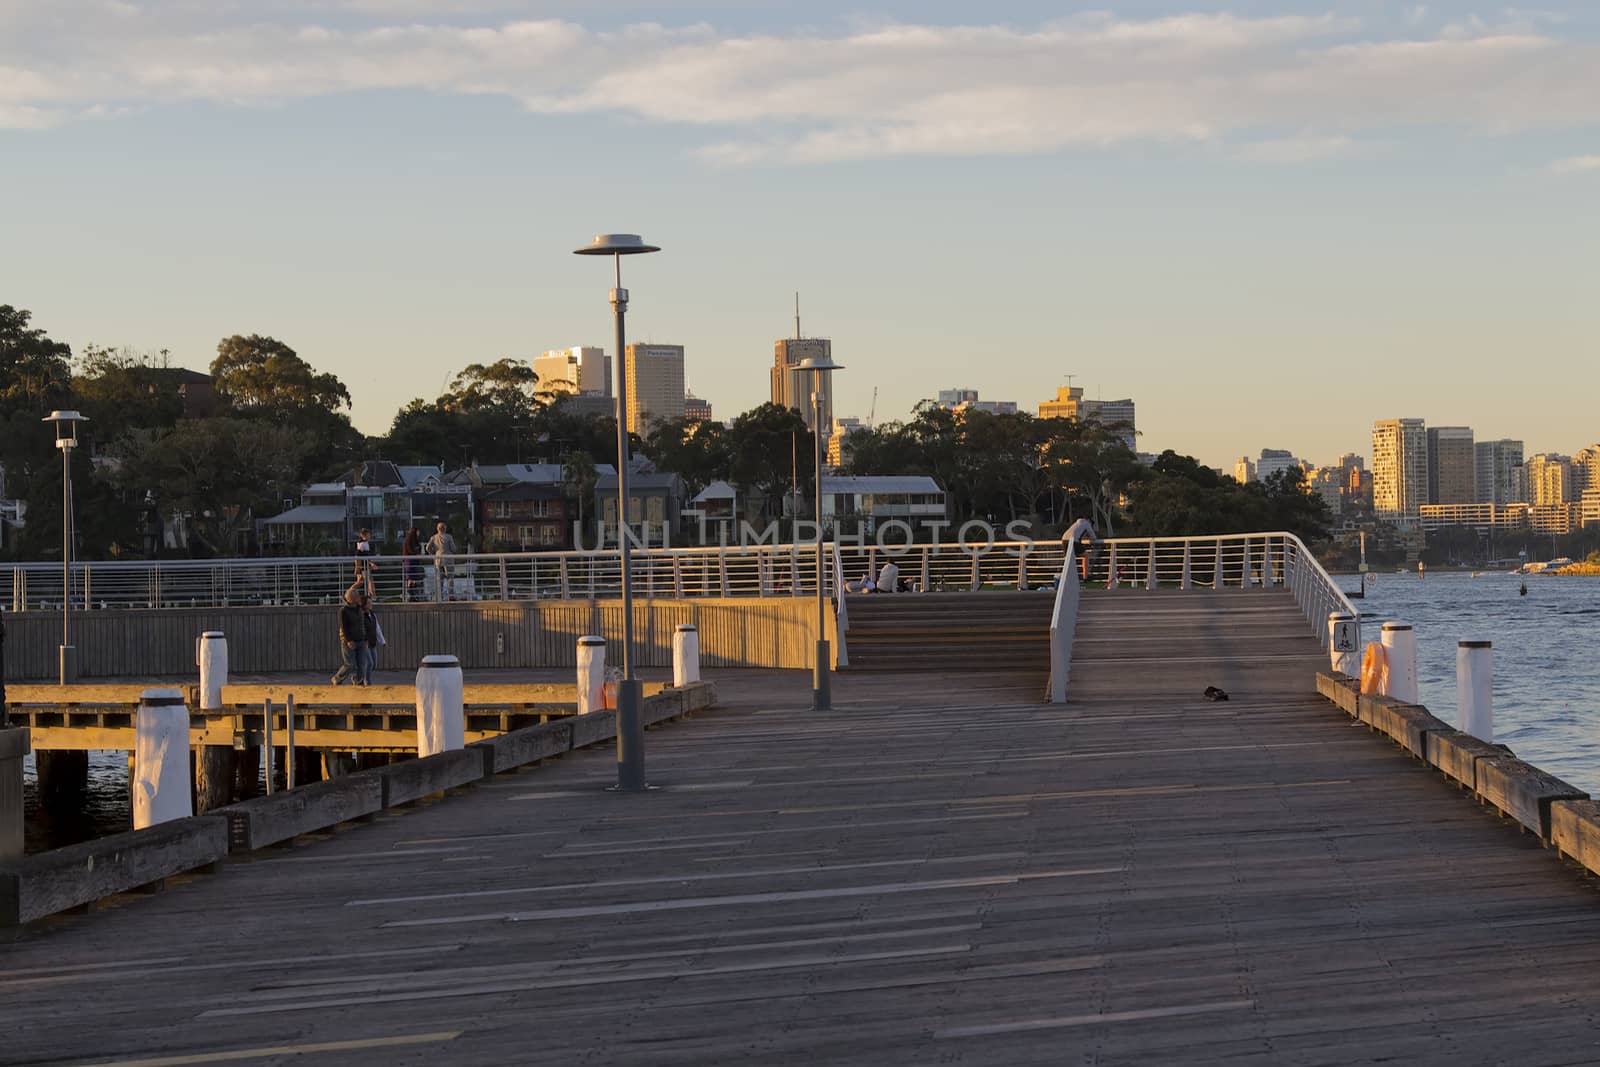 Sydney, Australia - June 24, 2017: Fishermen at dusk on Darling Island Wharf in Pyrmont, Sydney Australia with the CBD skyscrapers in the background.